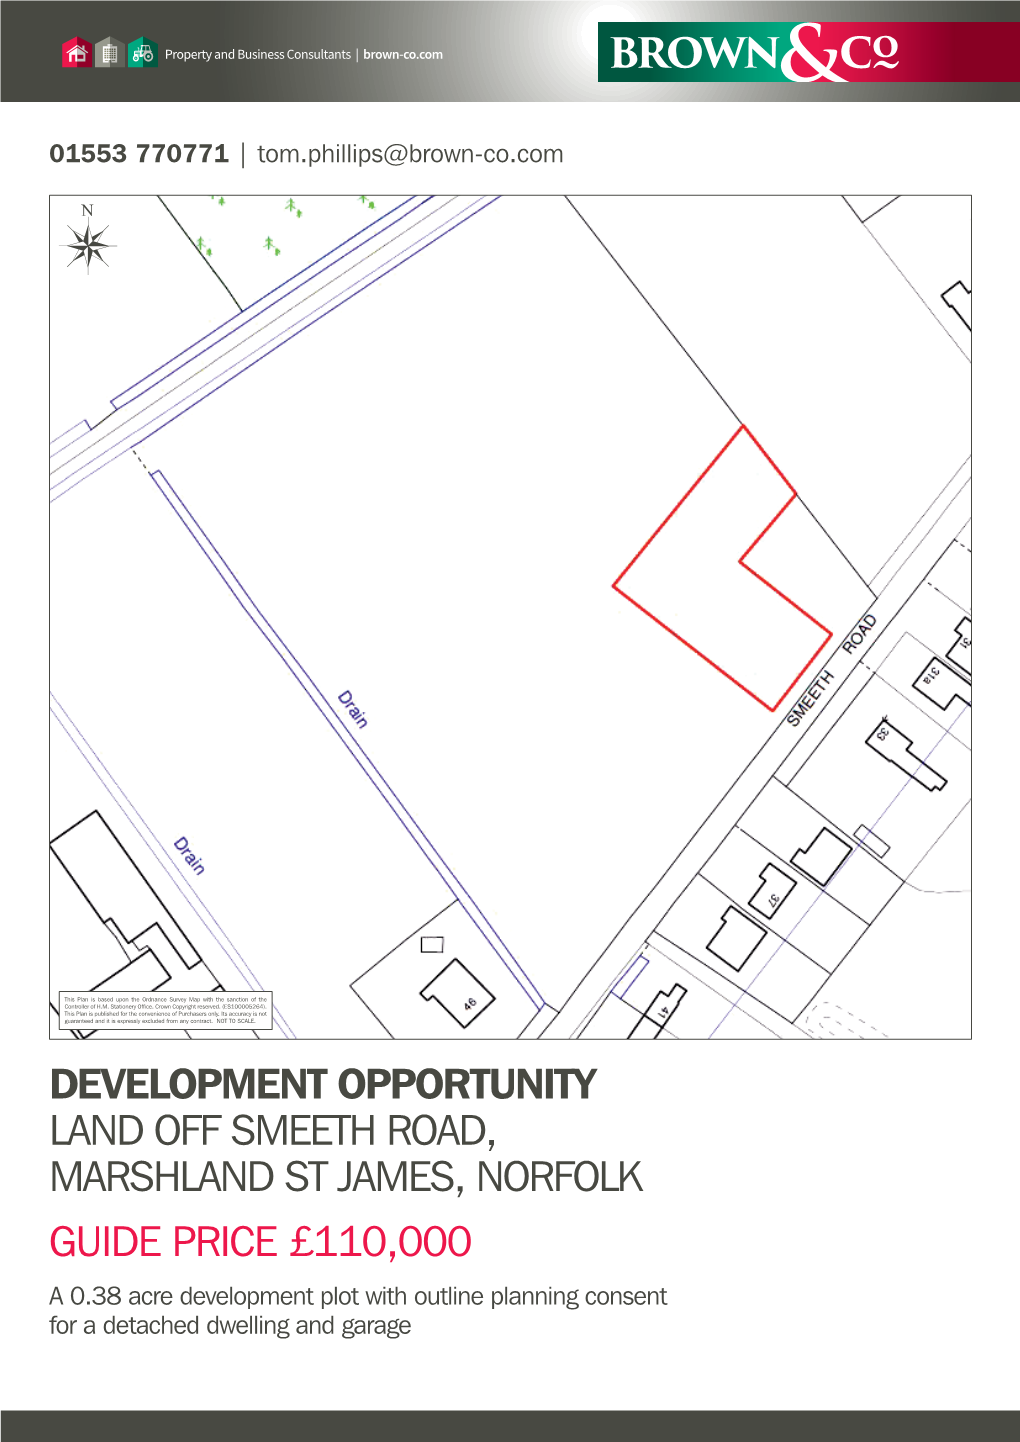 Development Opportunity Land Off Smeeth Road